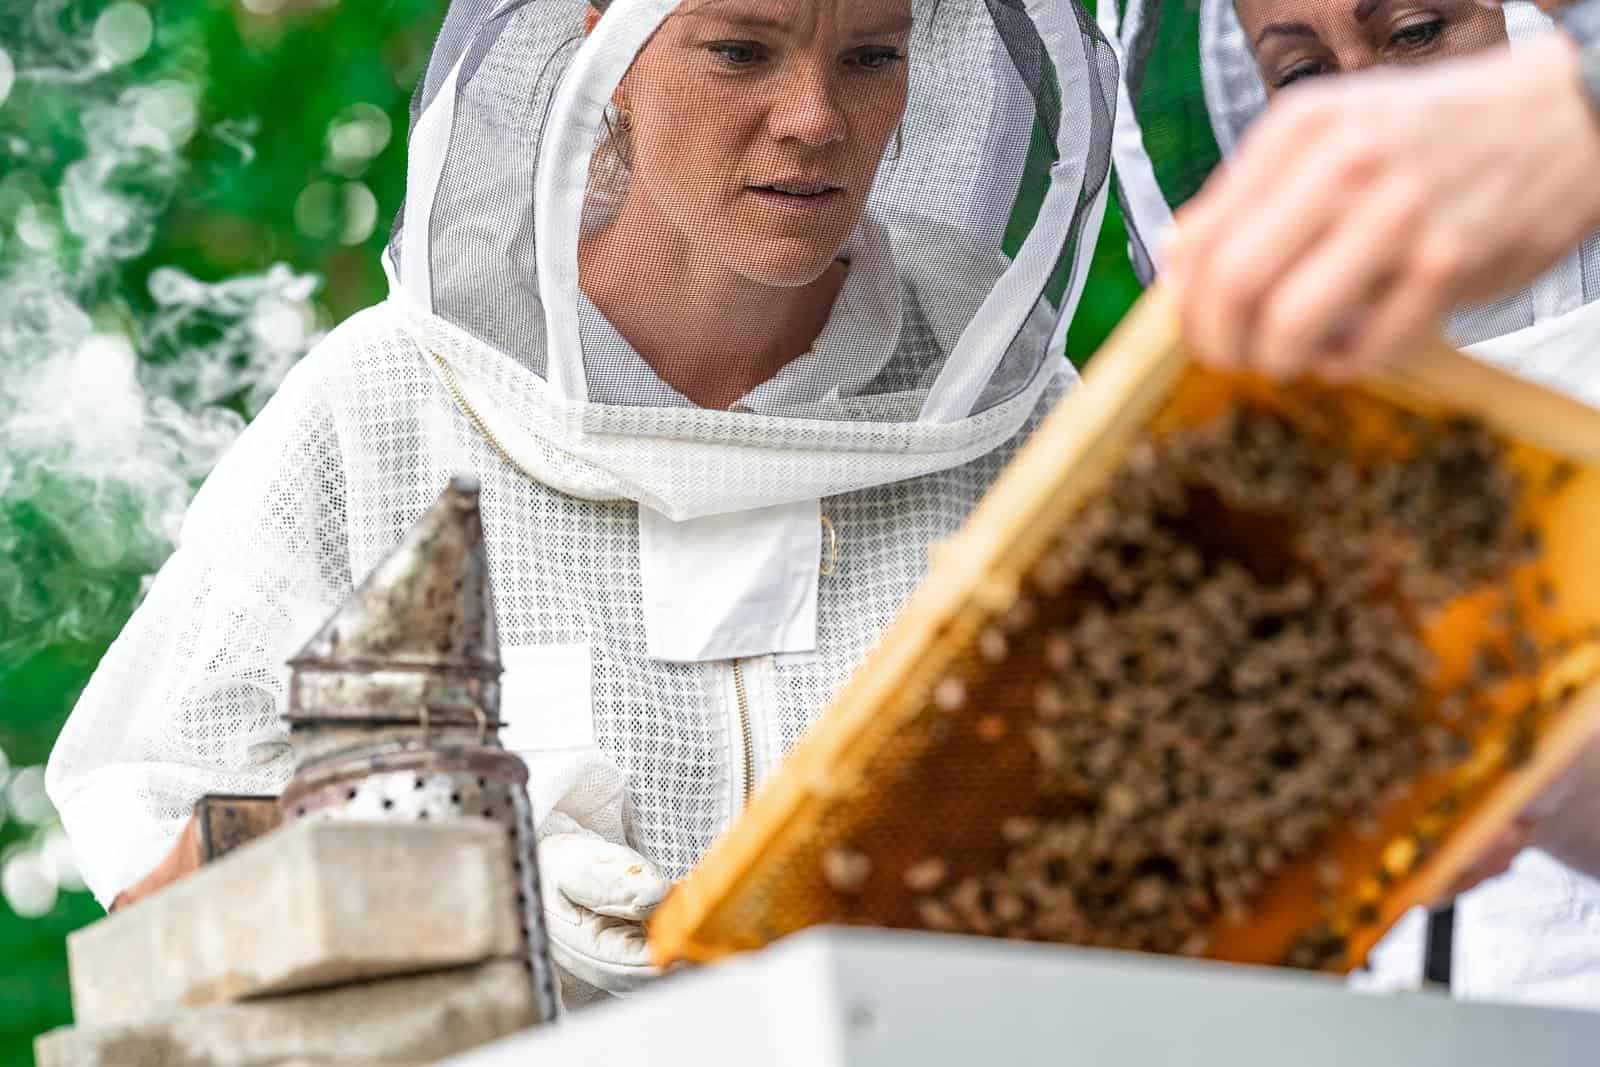 beekeepers inspect bees on a wax frame in a beekeeping.